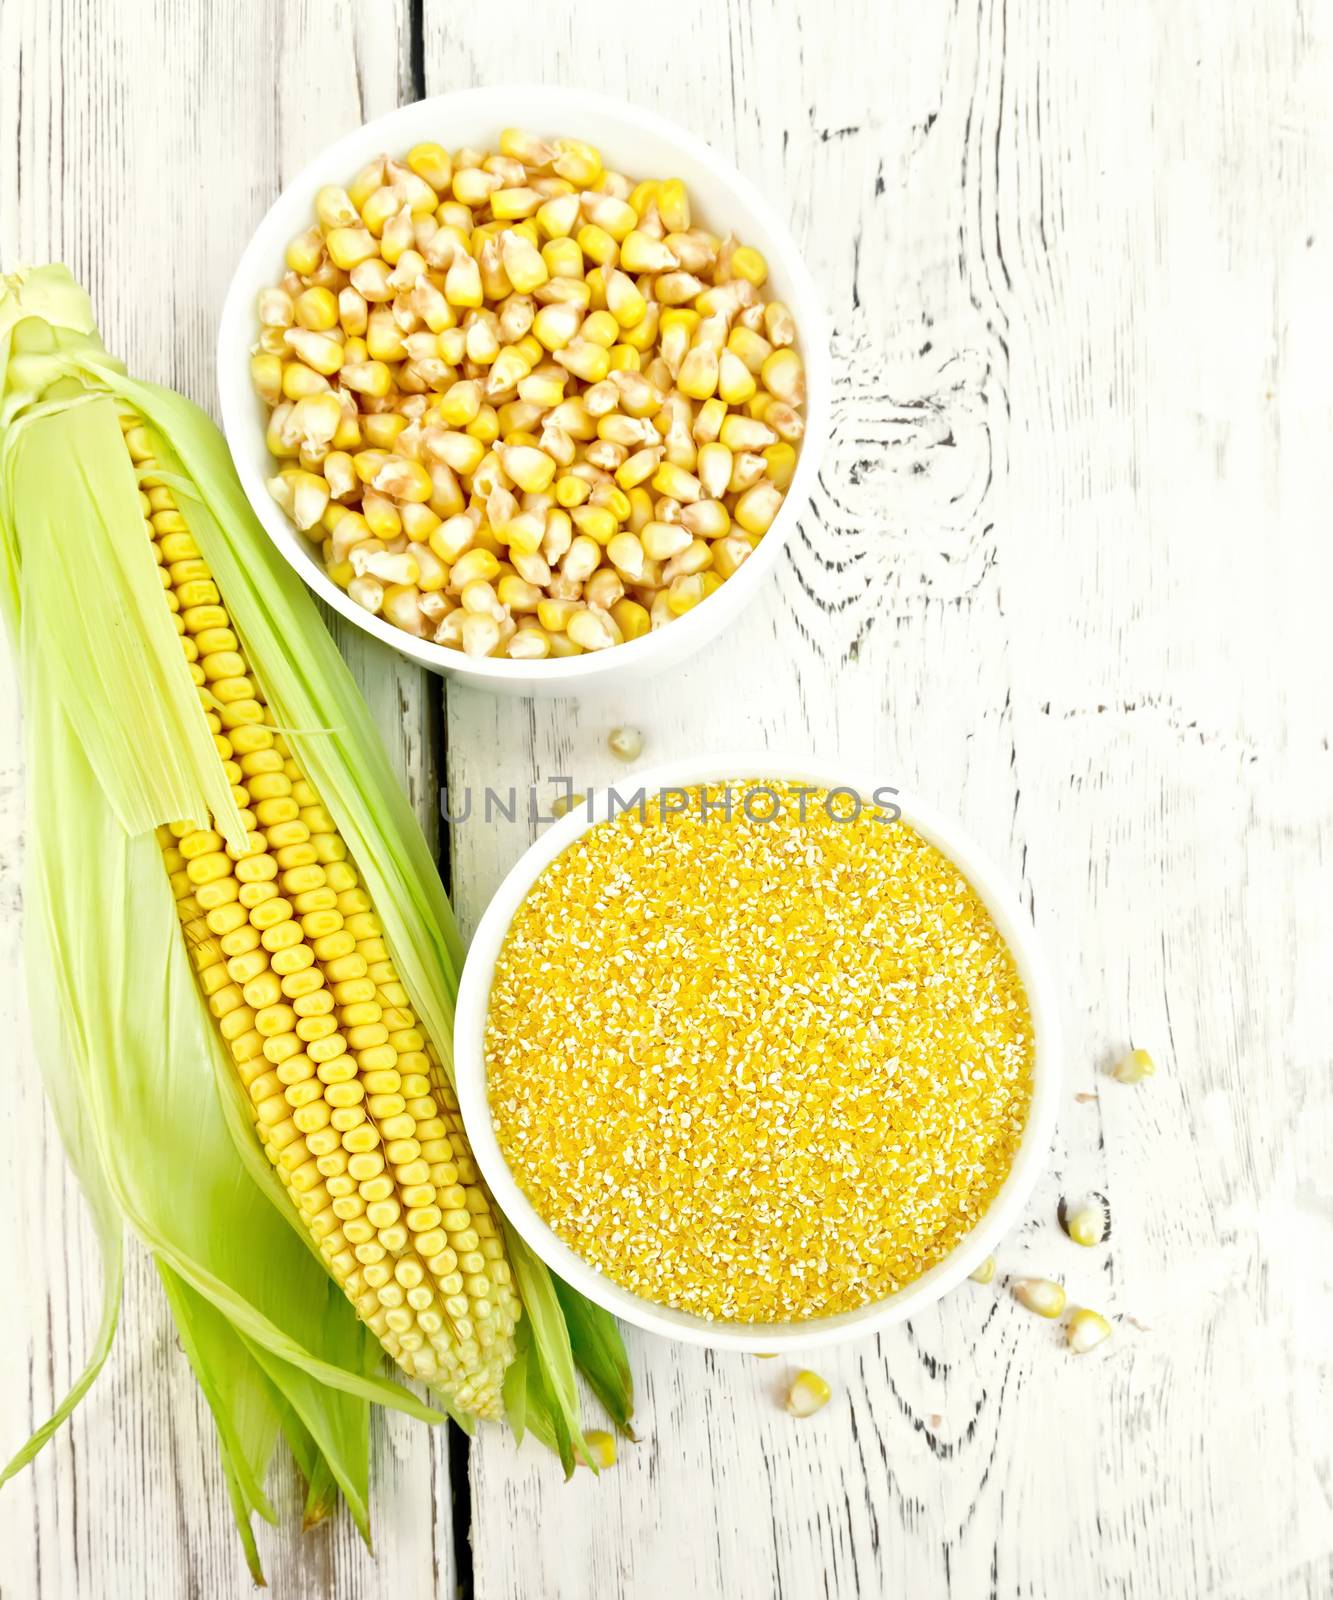 Corn grits and grains in two bowls, cob on the background of the wooden planks on top
